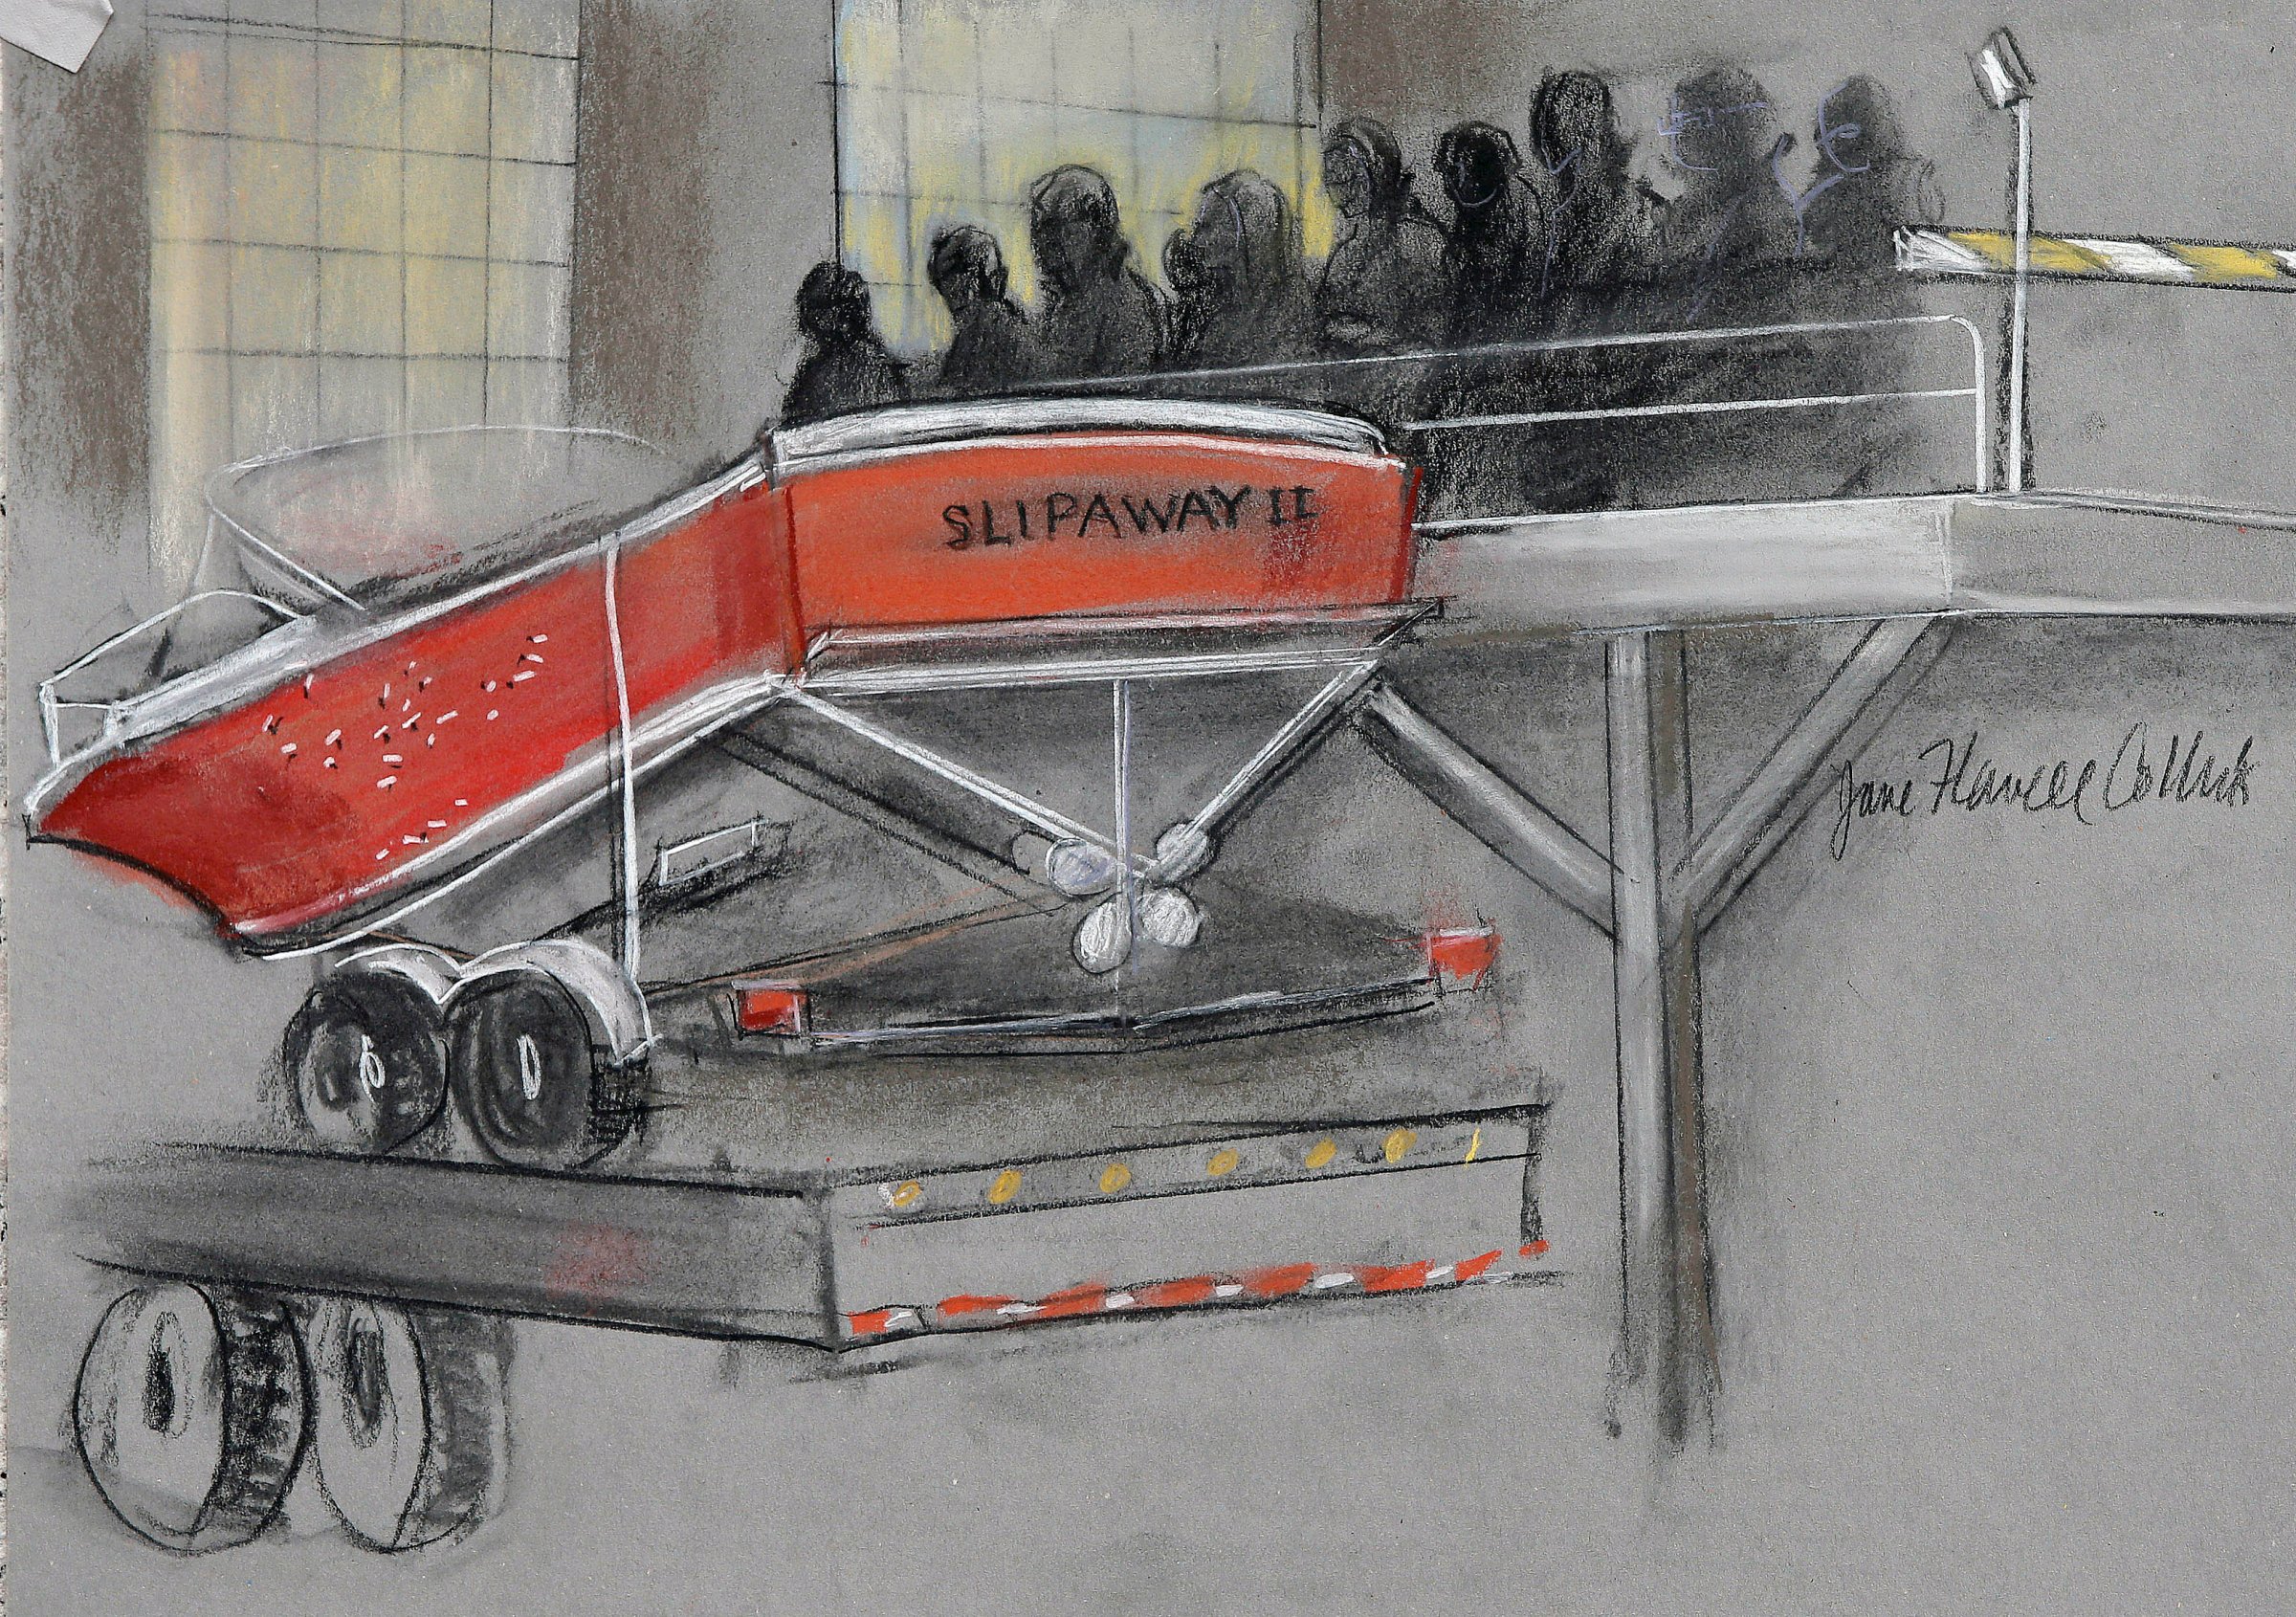 In this courtroom sketch, the boat in which Dzhokhar Tsarnaev was captured is depicted on a trailer for observation during Tsarnaev's federal death penalty trial on March 16, 2015, in Boston.